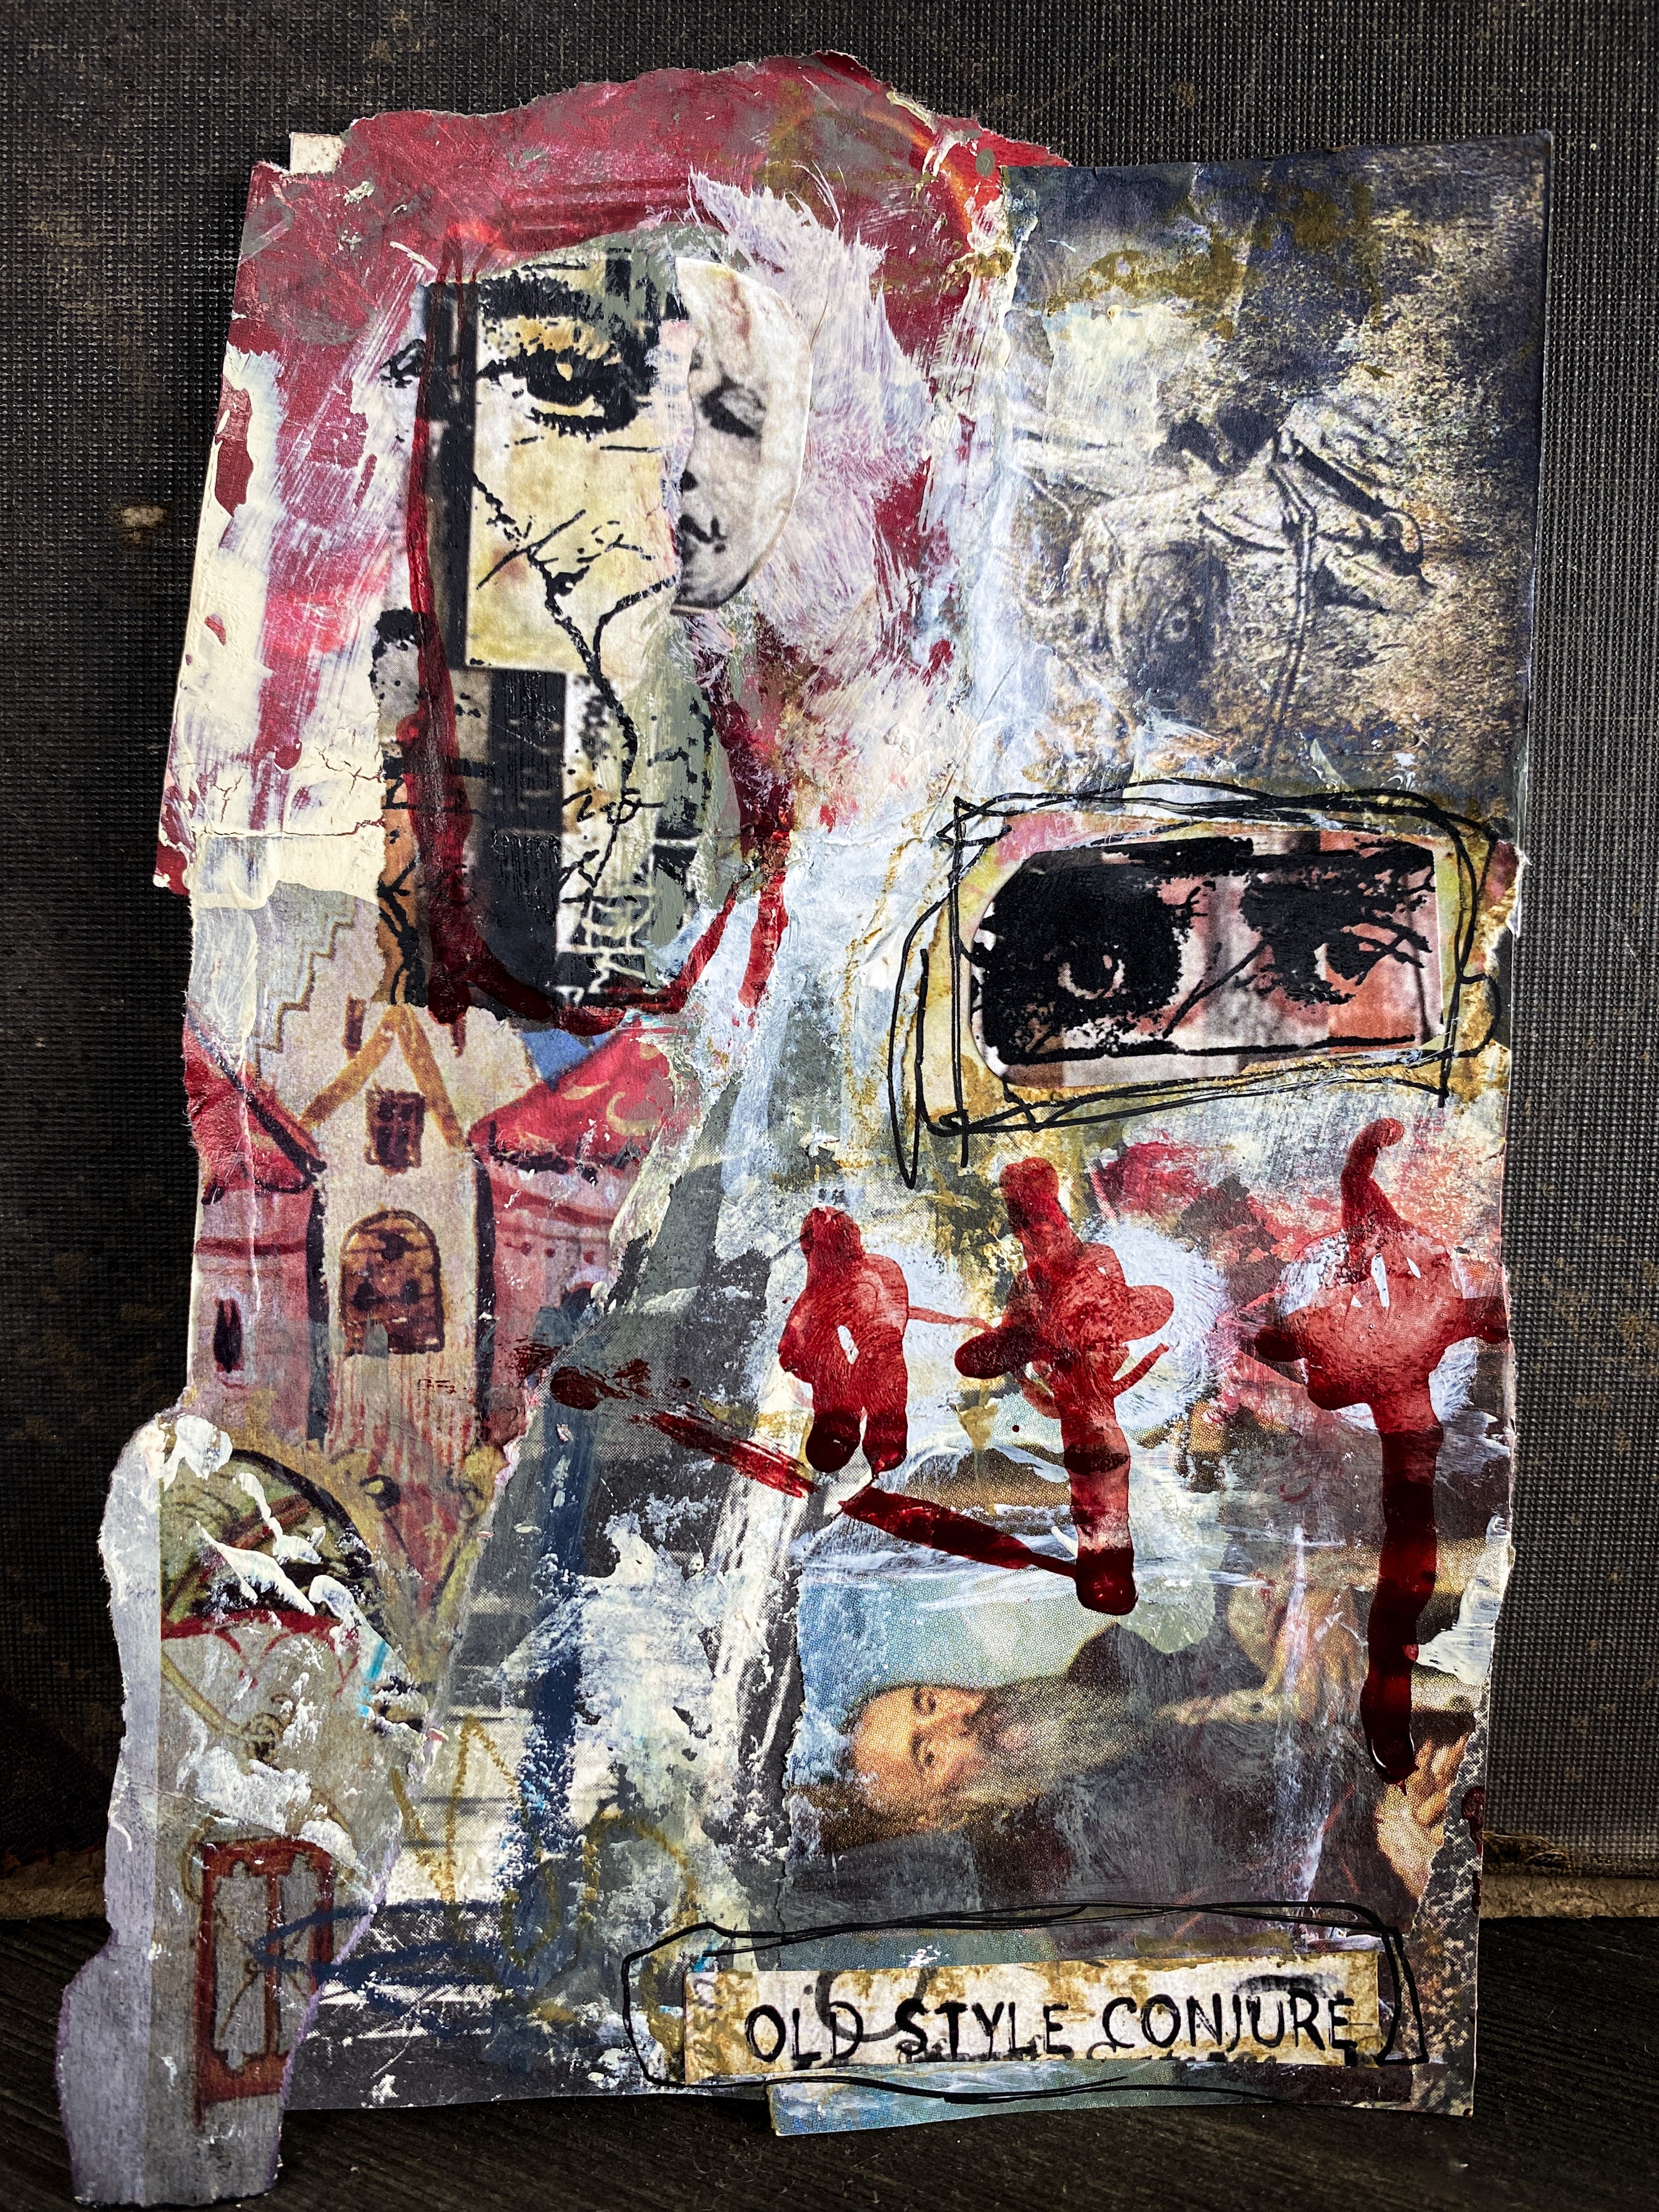 Old Style Conjure - Original Mixed Media Collage